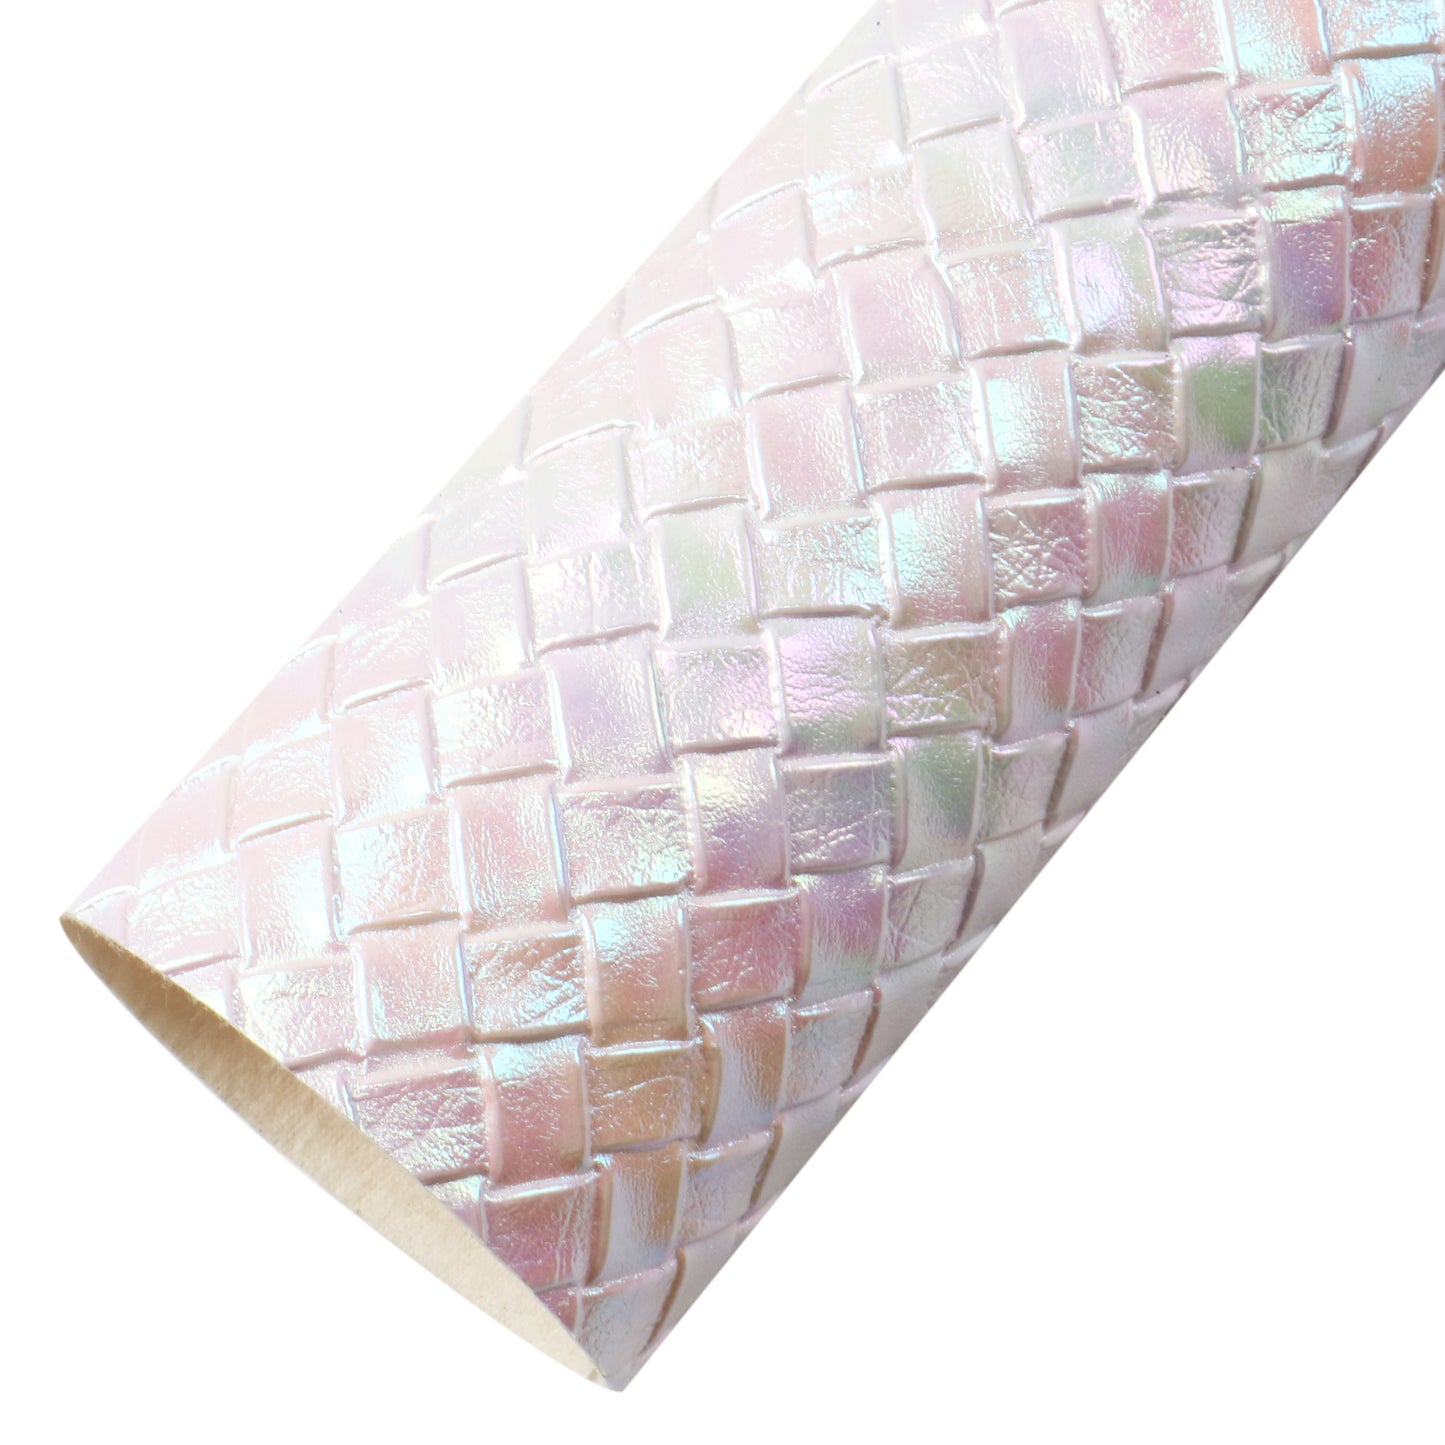 Bump Textured Holographic Braided Faux Leather Sheets Wholesale